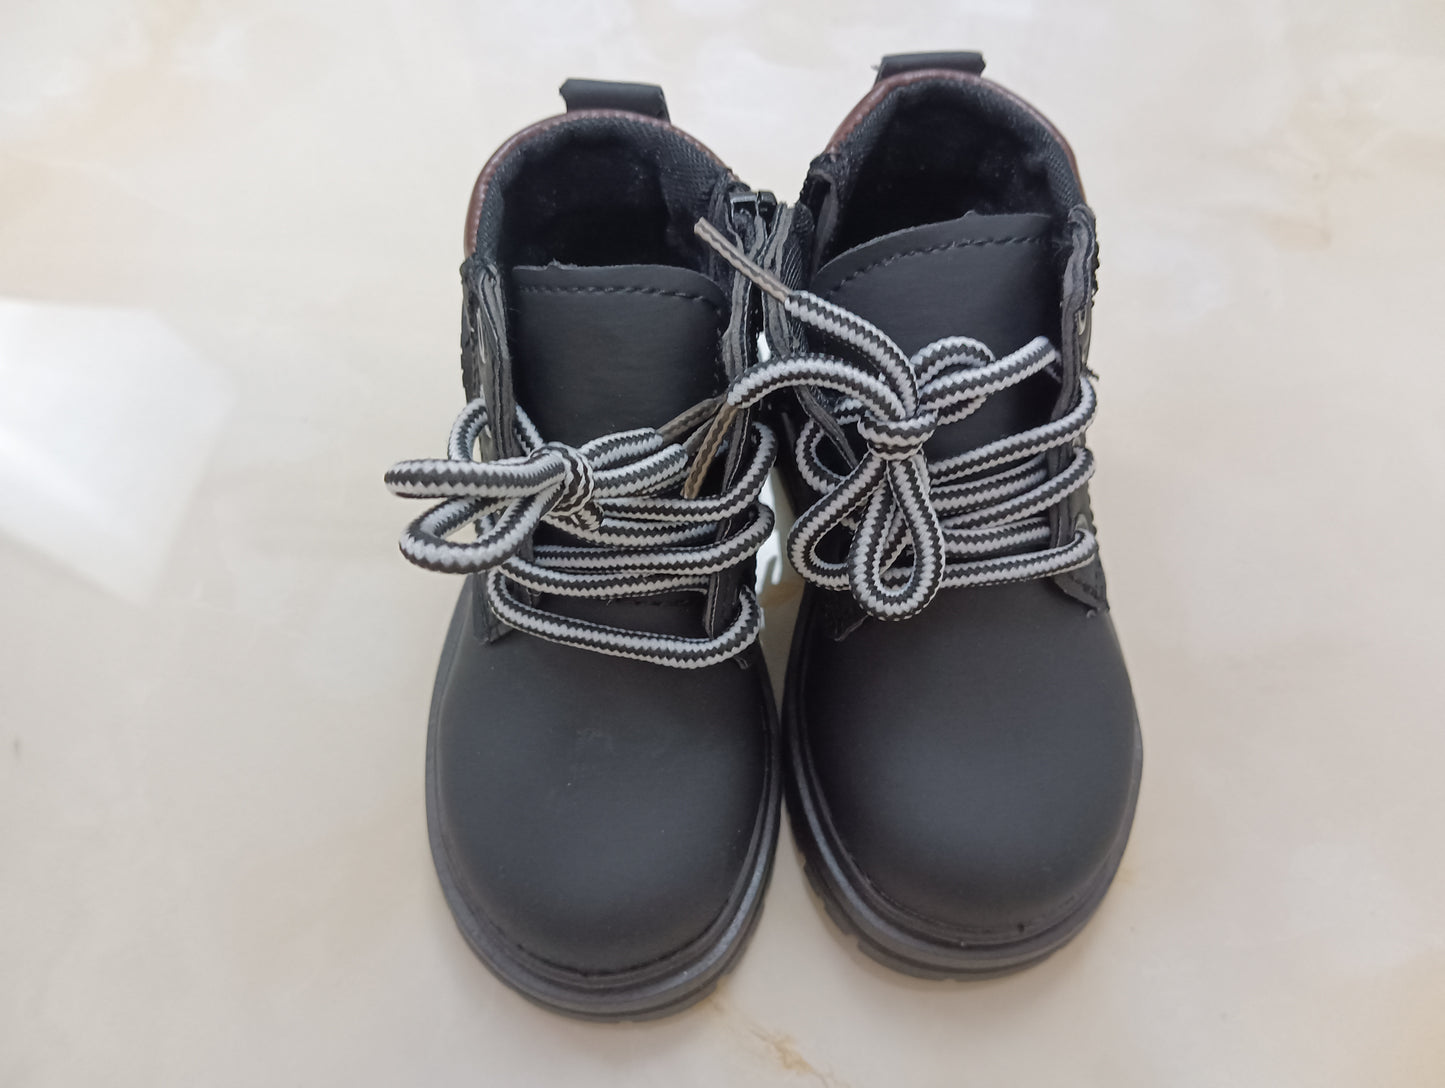 KKWMNKMO Infants' shoes and boots Martin boots children's new fall and winter small children's baby shoes classic wind foreign children's boots